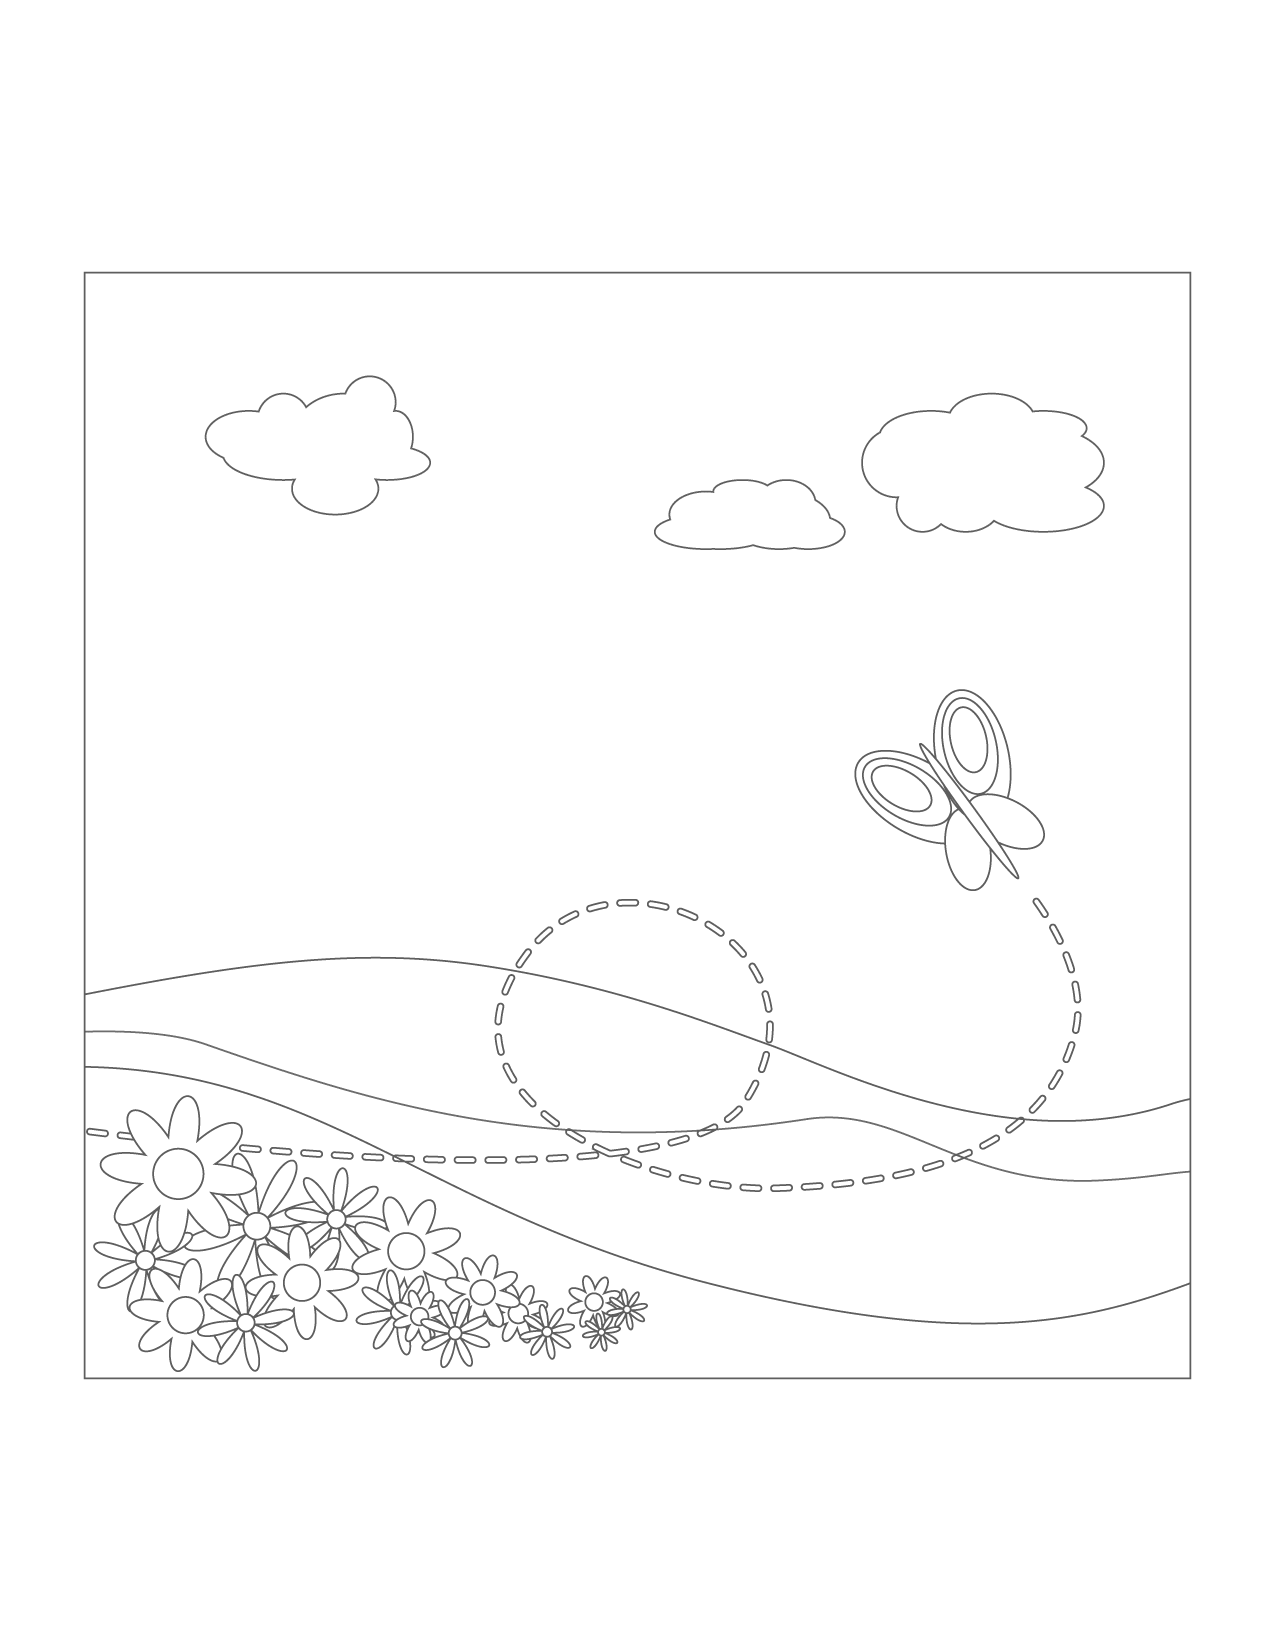 Butterfly Scene Coloring Page